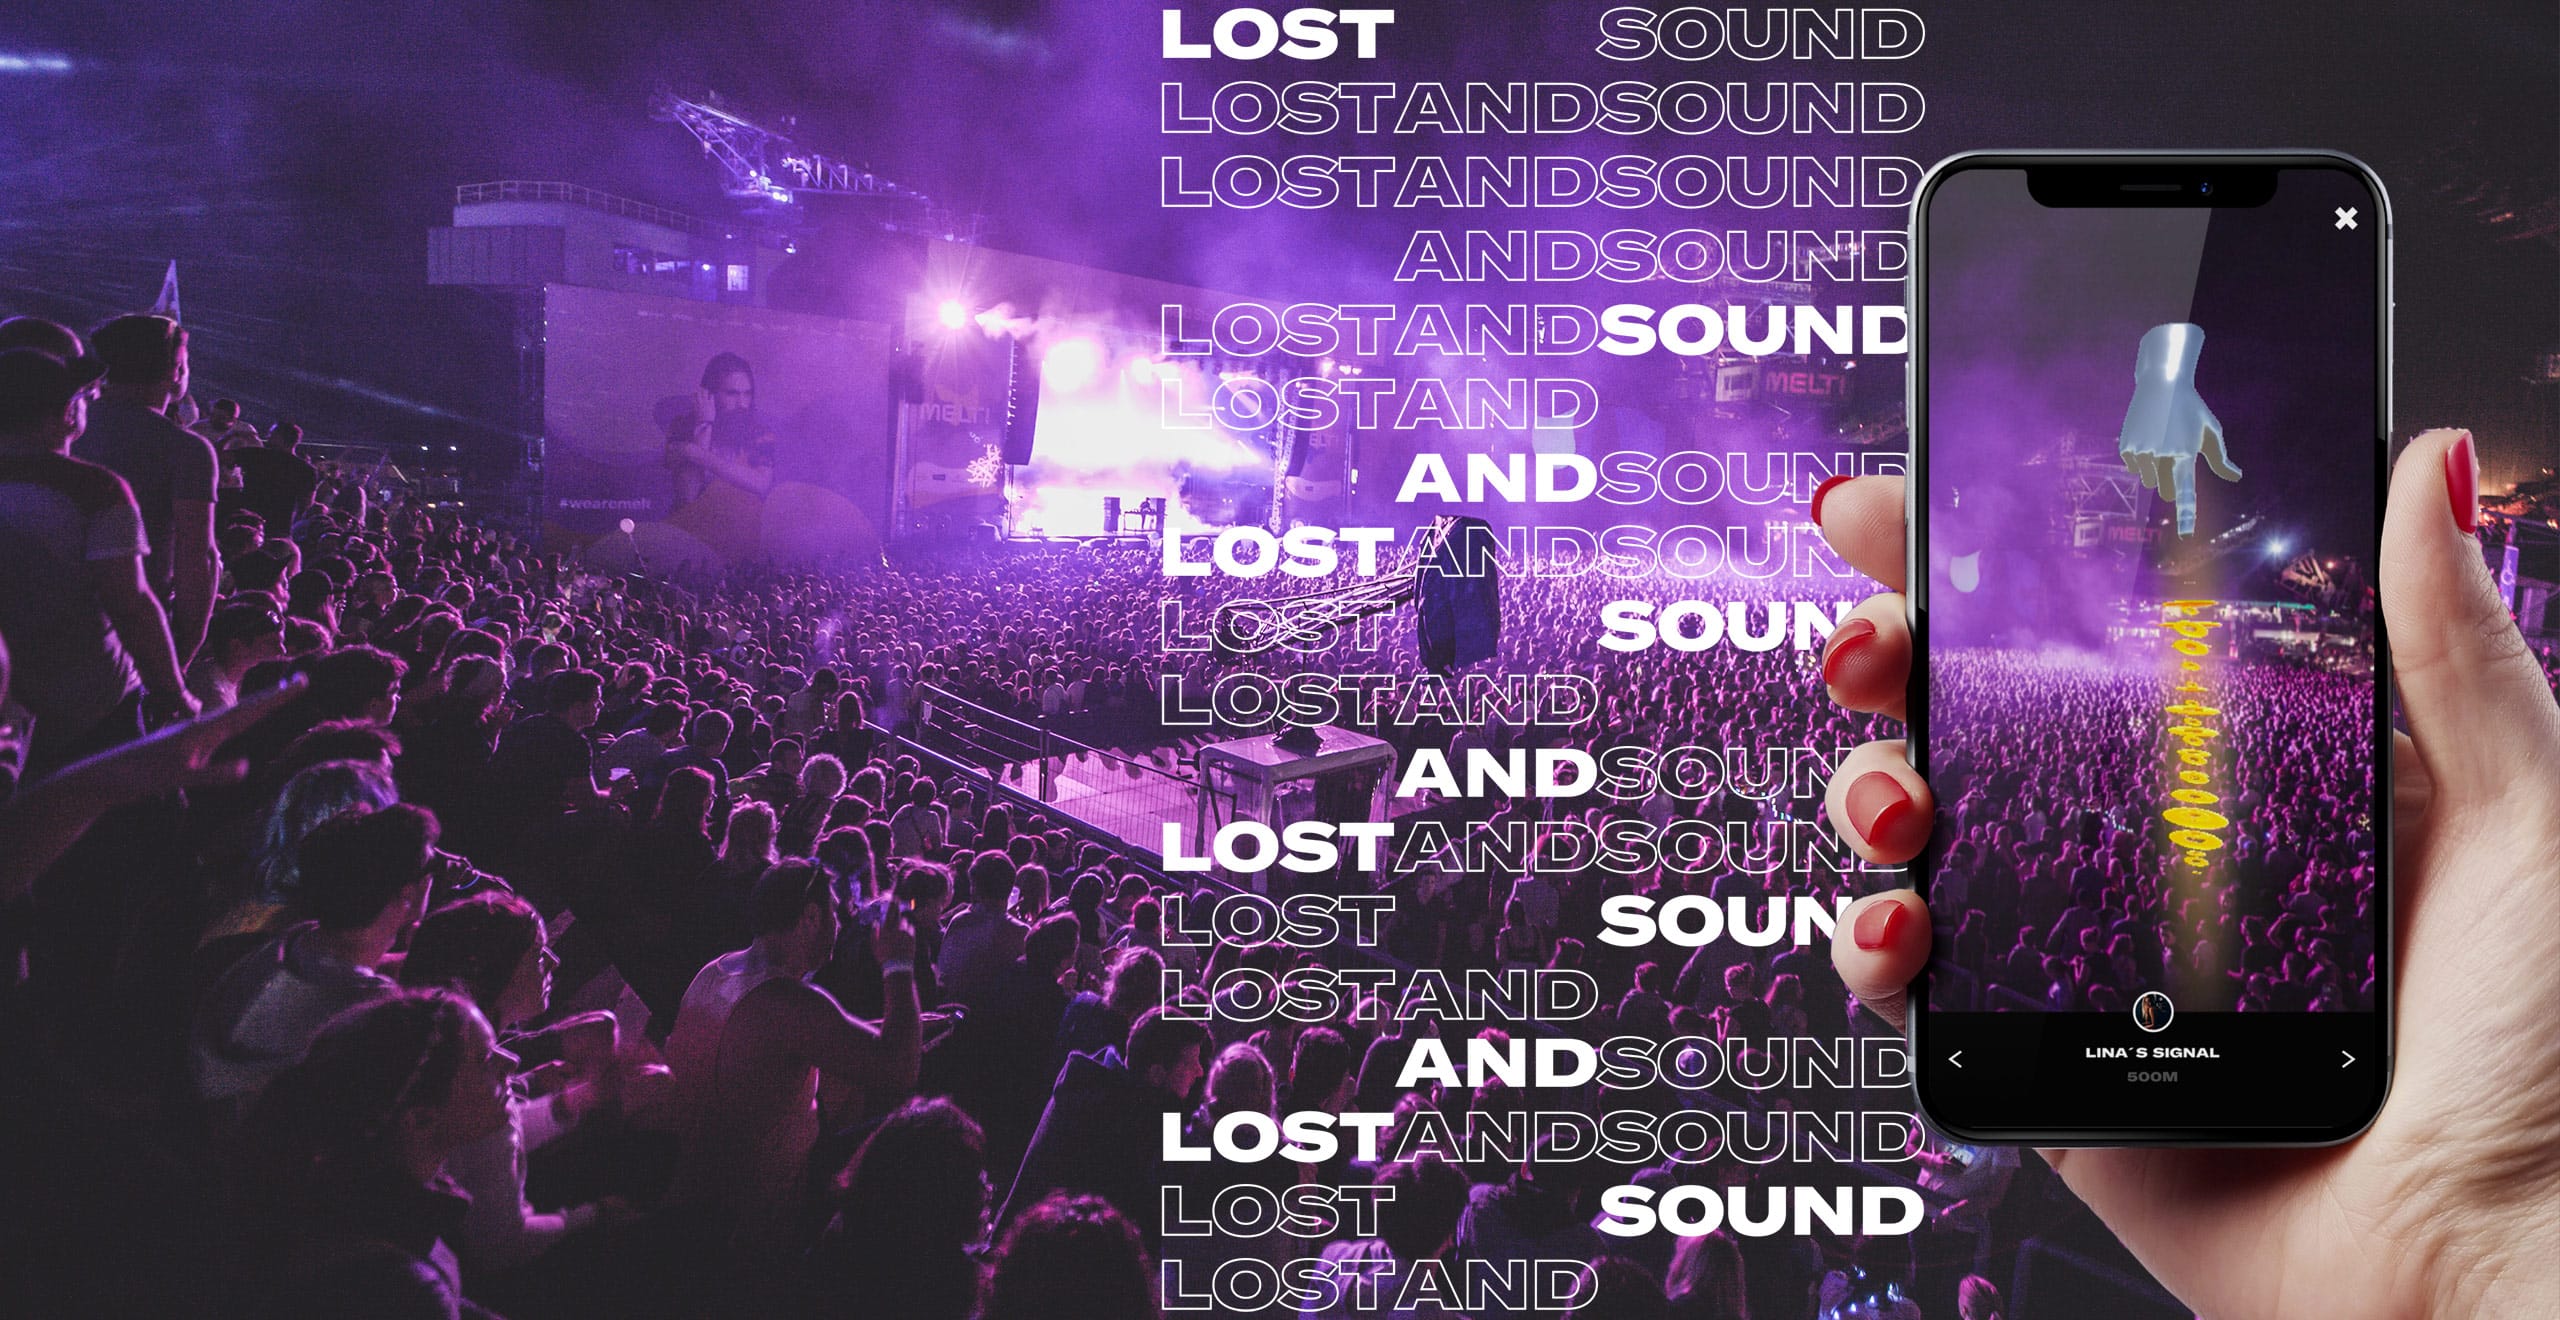 Find your friends Lost & Sound app